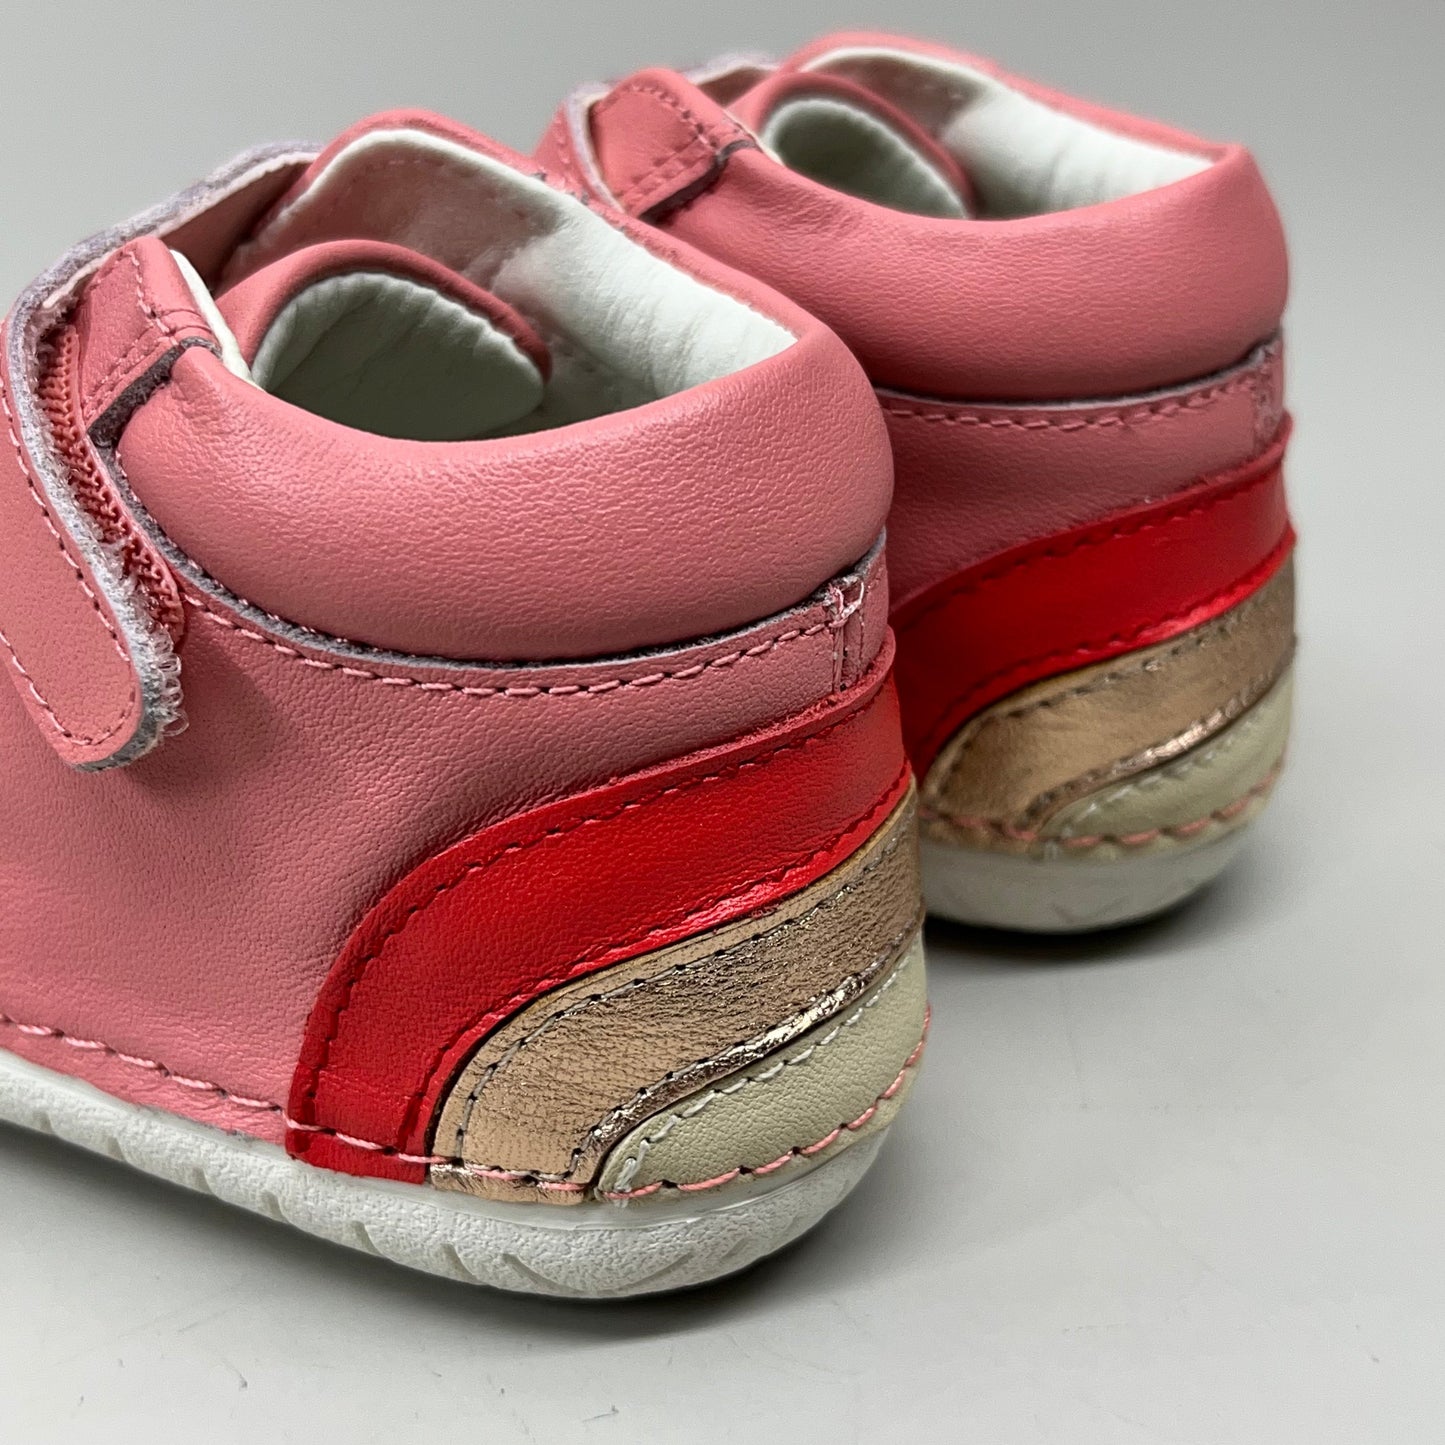 OLD SOLES Baby Rainbow Champster Leather Shoe Sz 25 US 9 Rossini/Red/Copper/Cream #4091